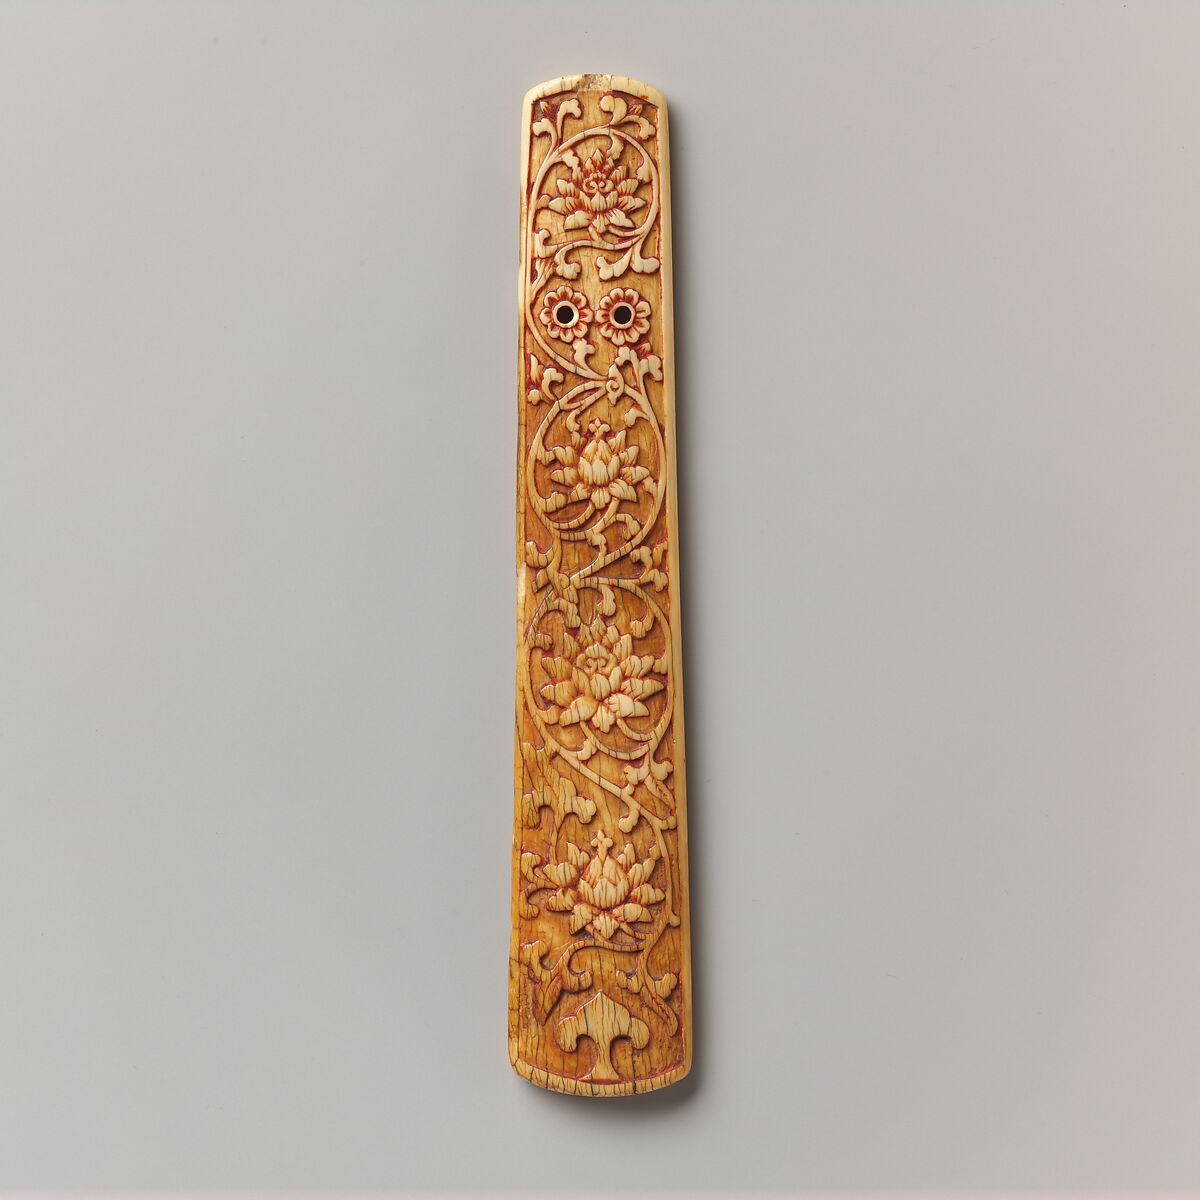 Section of a Clapper (Paiban), Ivory, China 